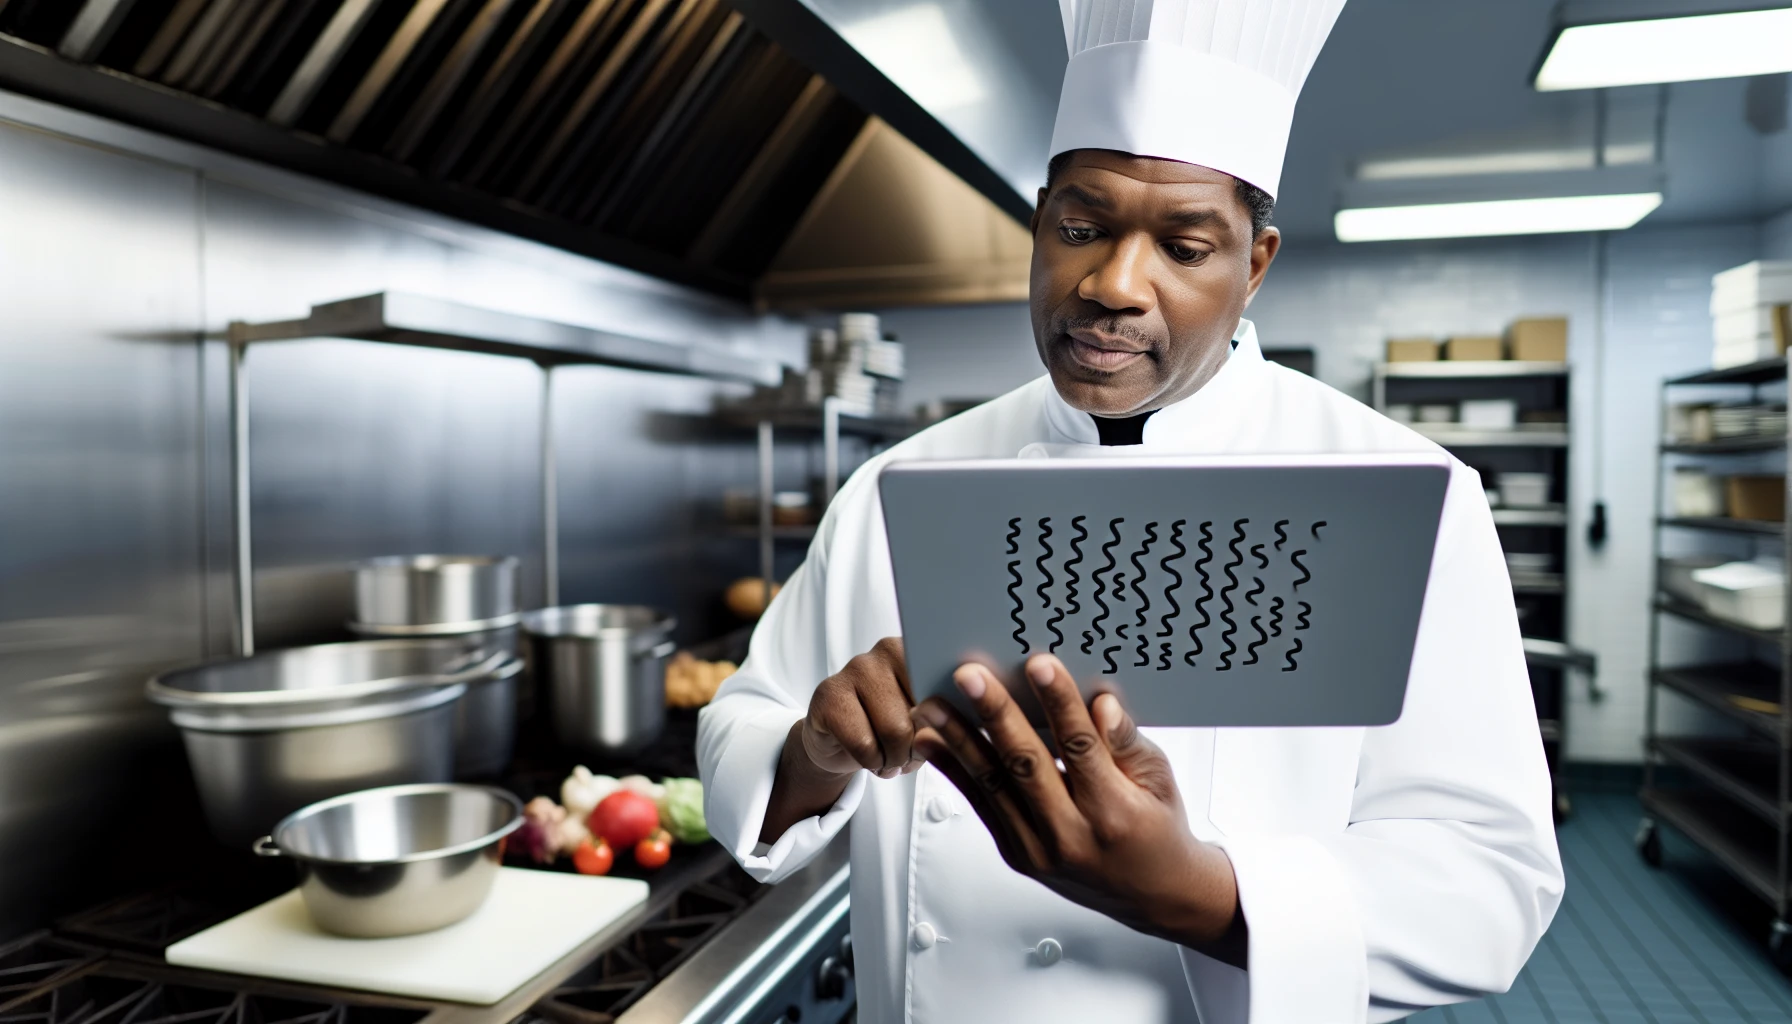 Chef checking inventory on a digital device